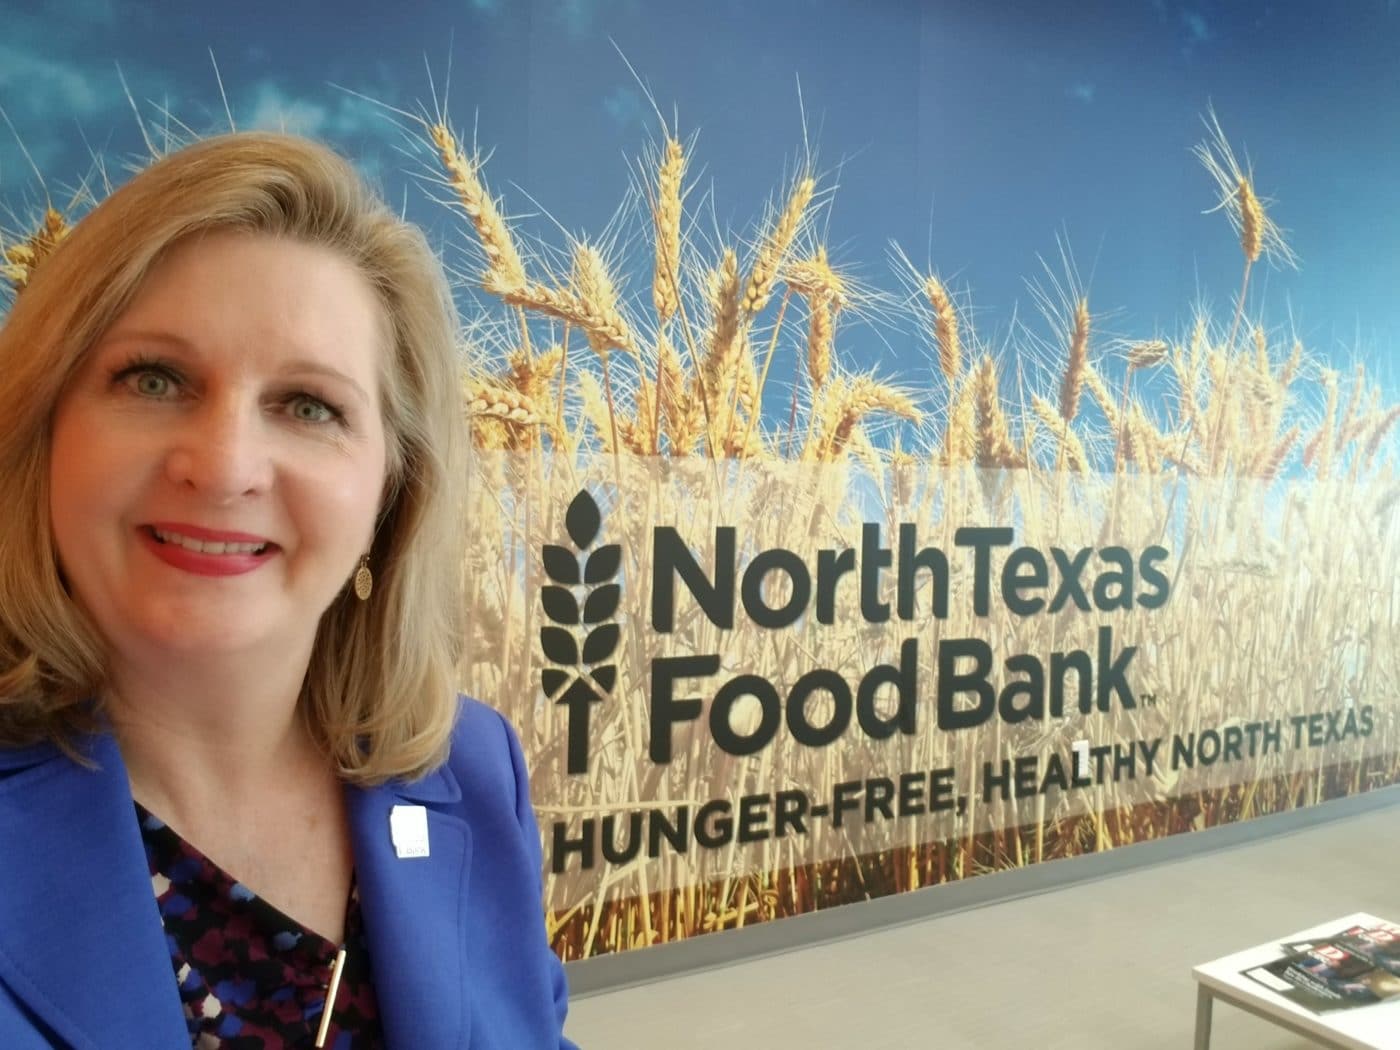 Trisha Cunningham smiling in front of the North Texas Food Bank logo